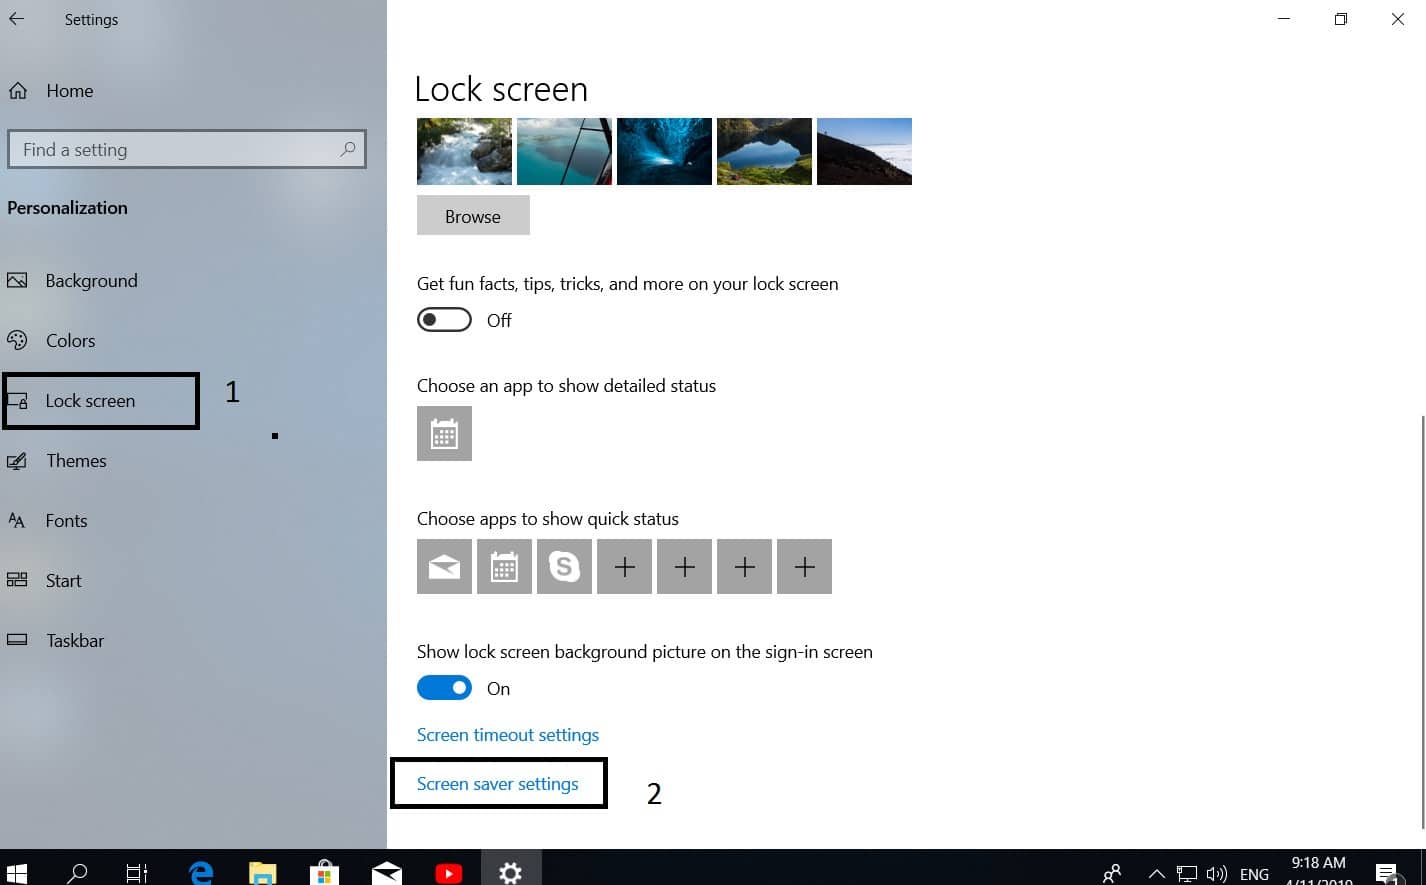 How To Find Enable And Set Up A Screen Saver In Windows 10